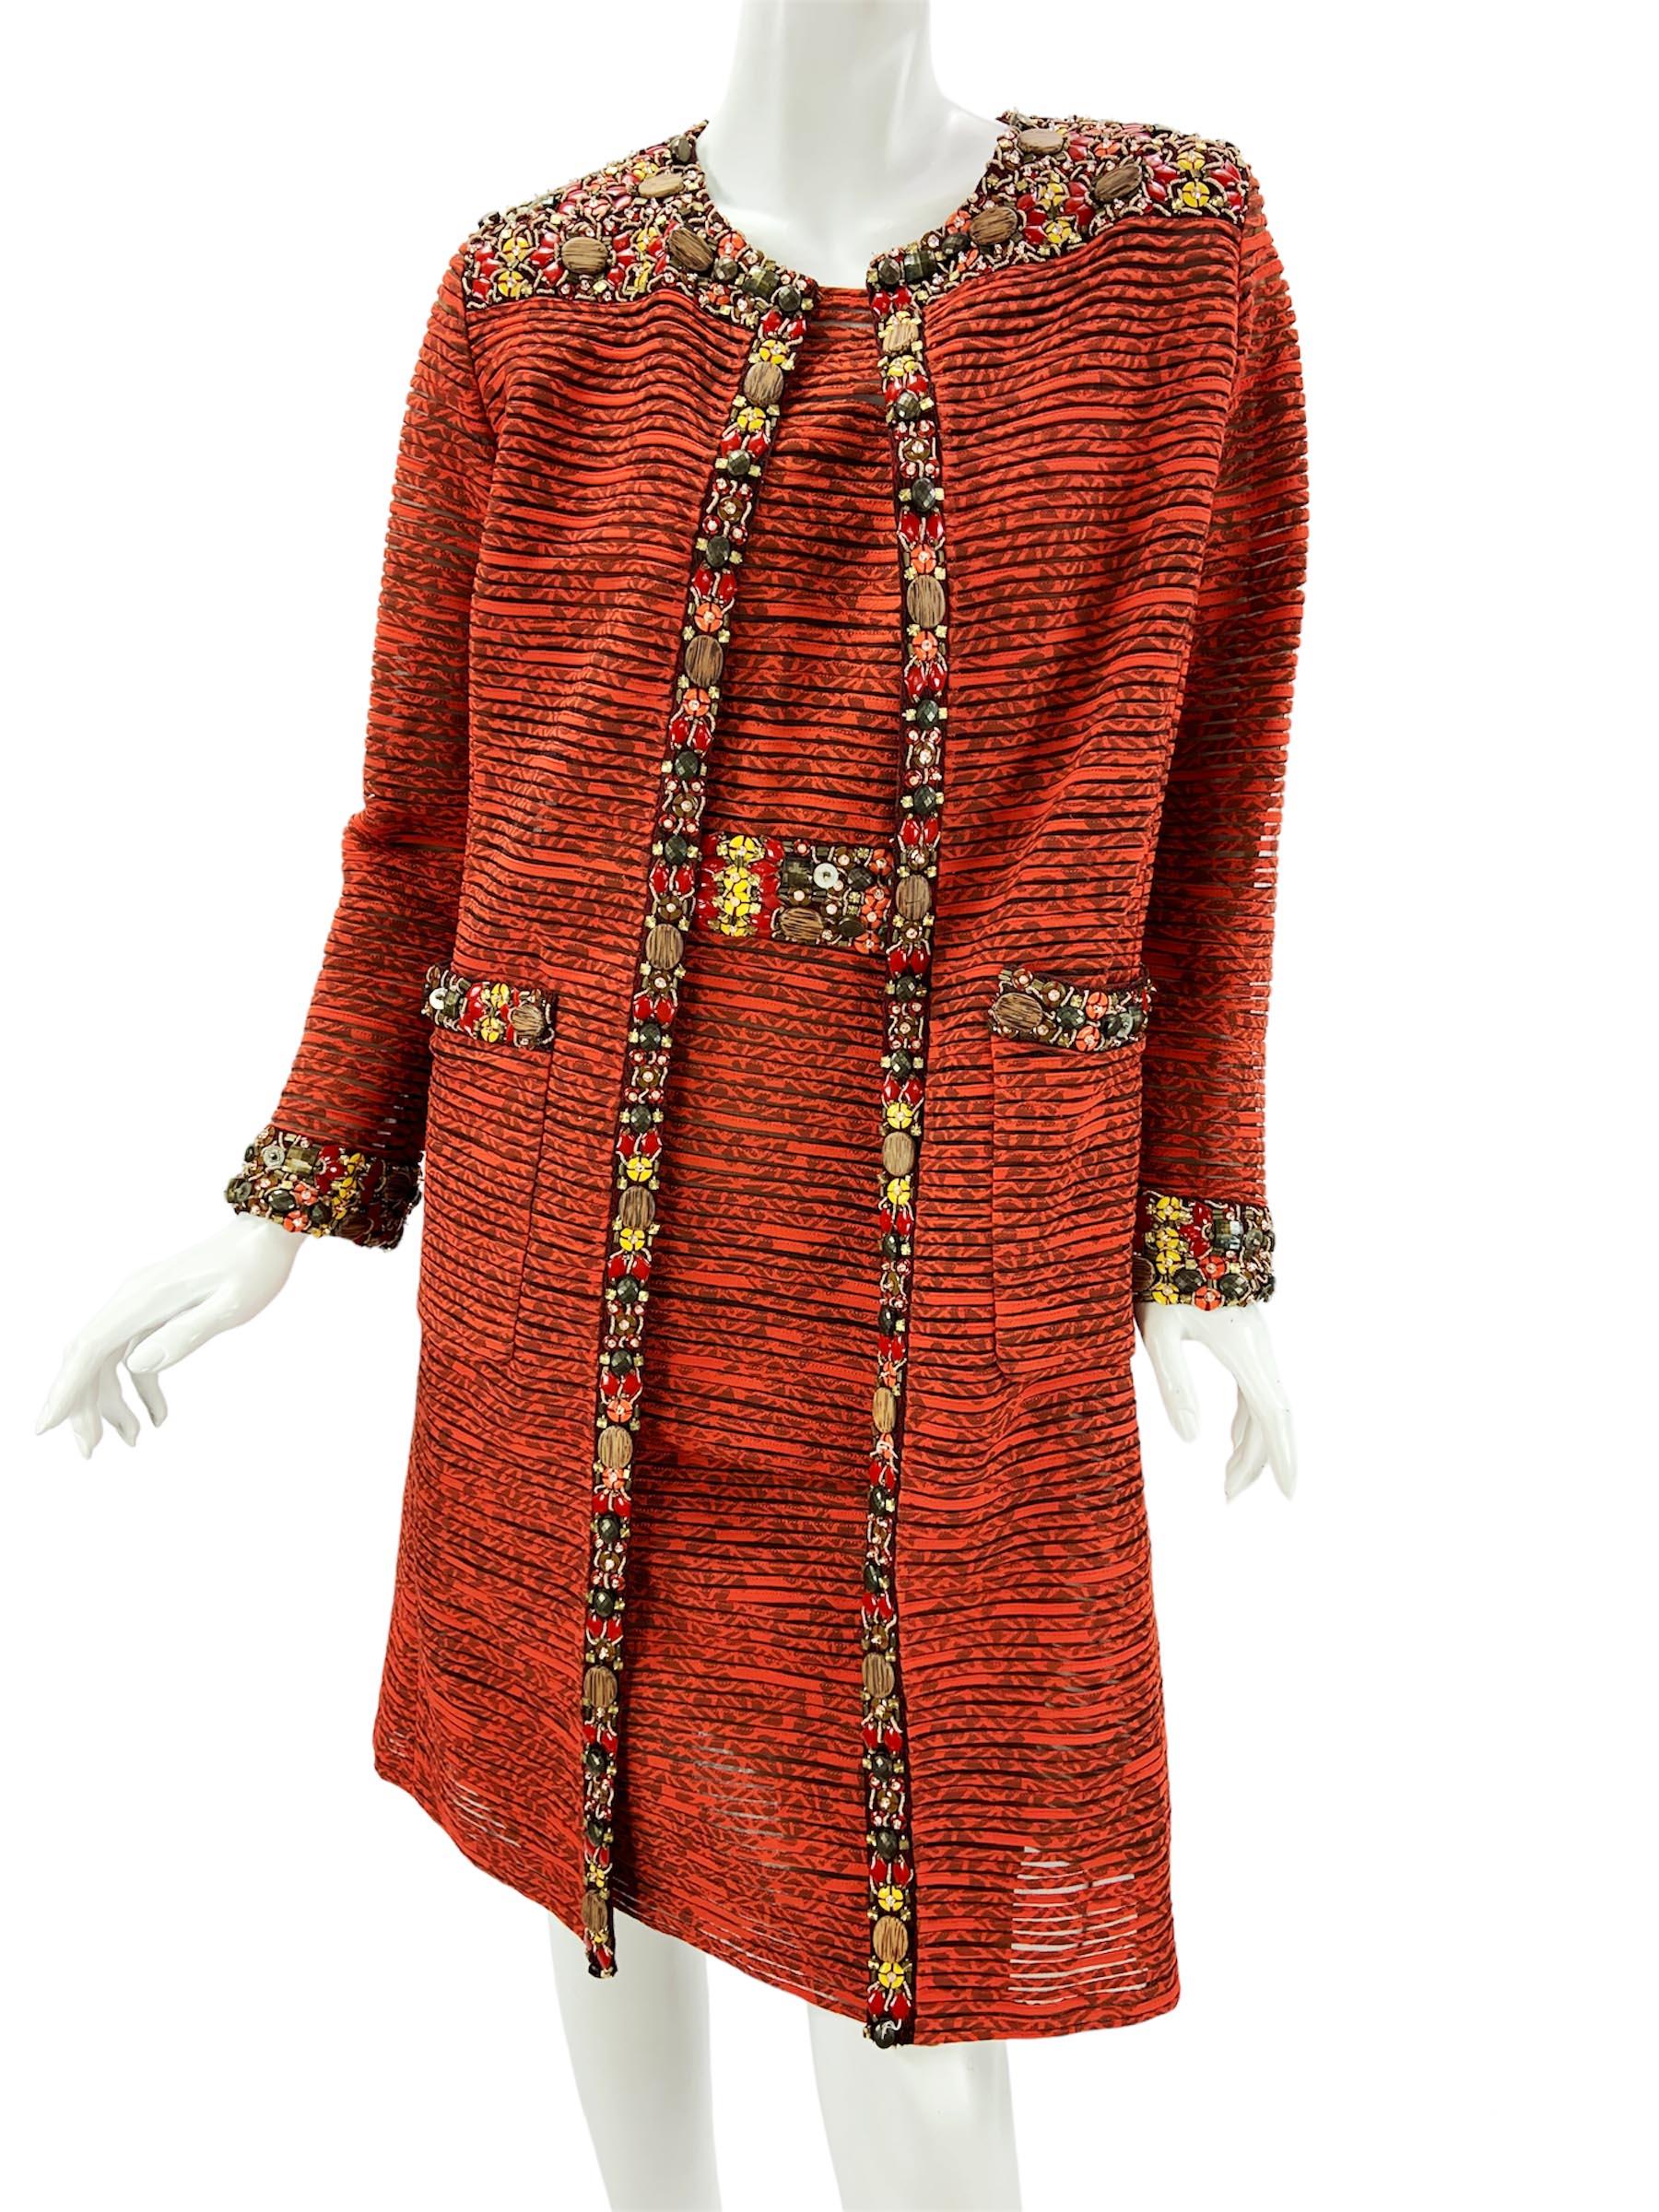 Oscar de la Renta Silk Brick Red Embellished Coat with Matching Dress
2009 Collection
Dress USA size - 6 , Coat - size 4 ( the measurements is match for the set ).
Silk Ribbons Over the Tulle, Exclusively Embellished, Coat Fully Lined in Sheer